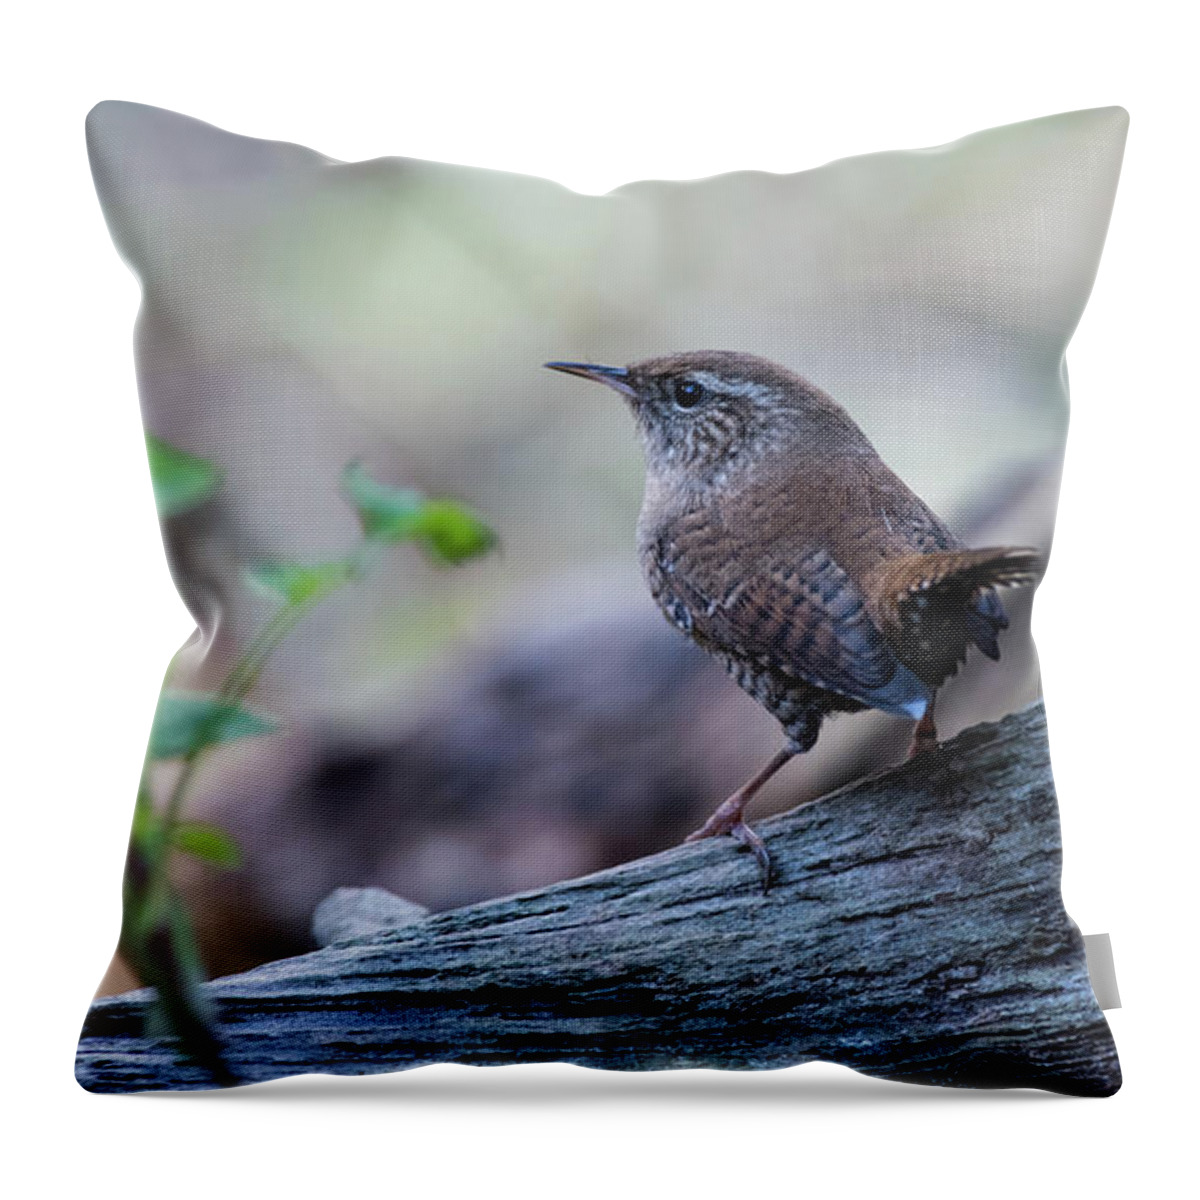 Wren Throw Pillow featuring the photograph Wren by Torbjorn Swenelius